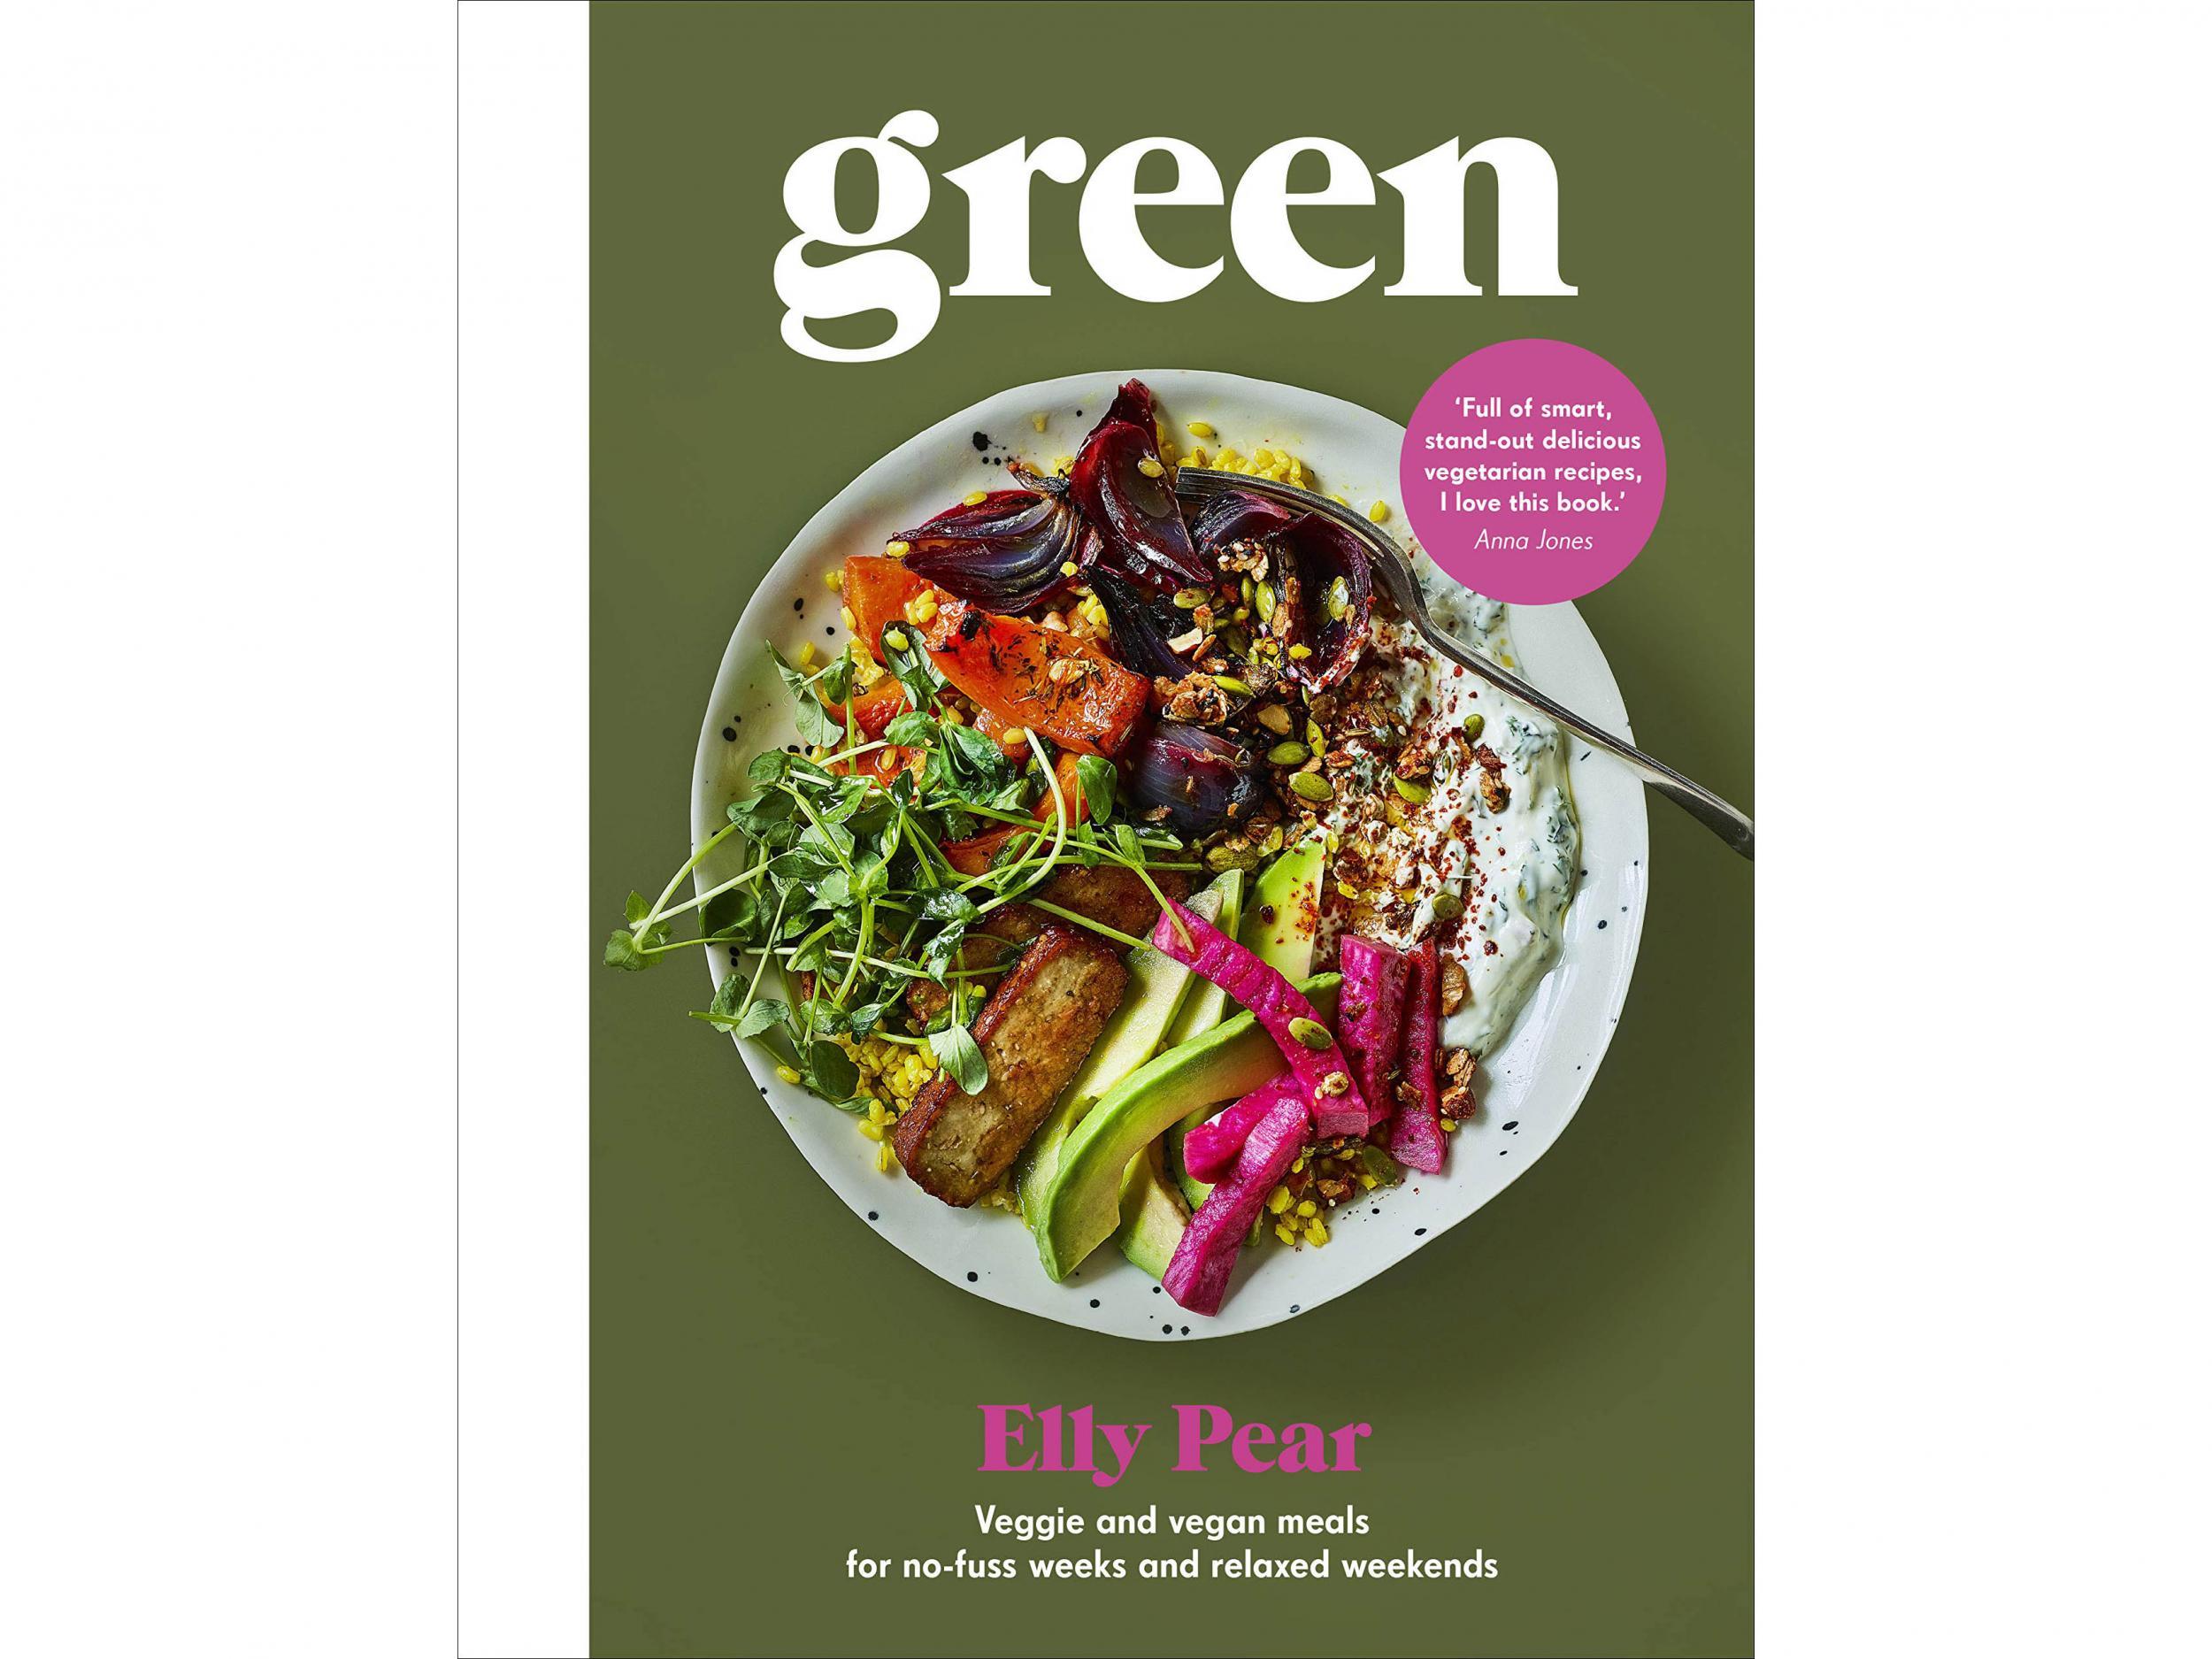 ‘Green: Veggie and vegan meals for no-fuss weeks and relaxed weekends’ by Elly Pear (Curshen). Published by Ebury Press: £14.99, Amazon